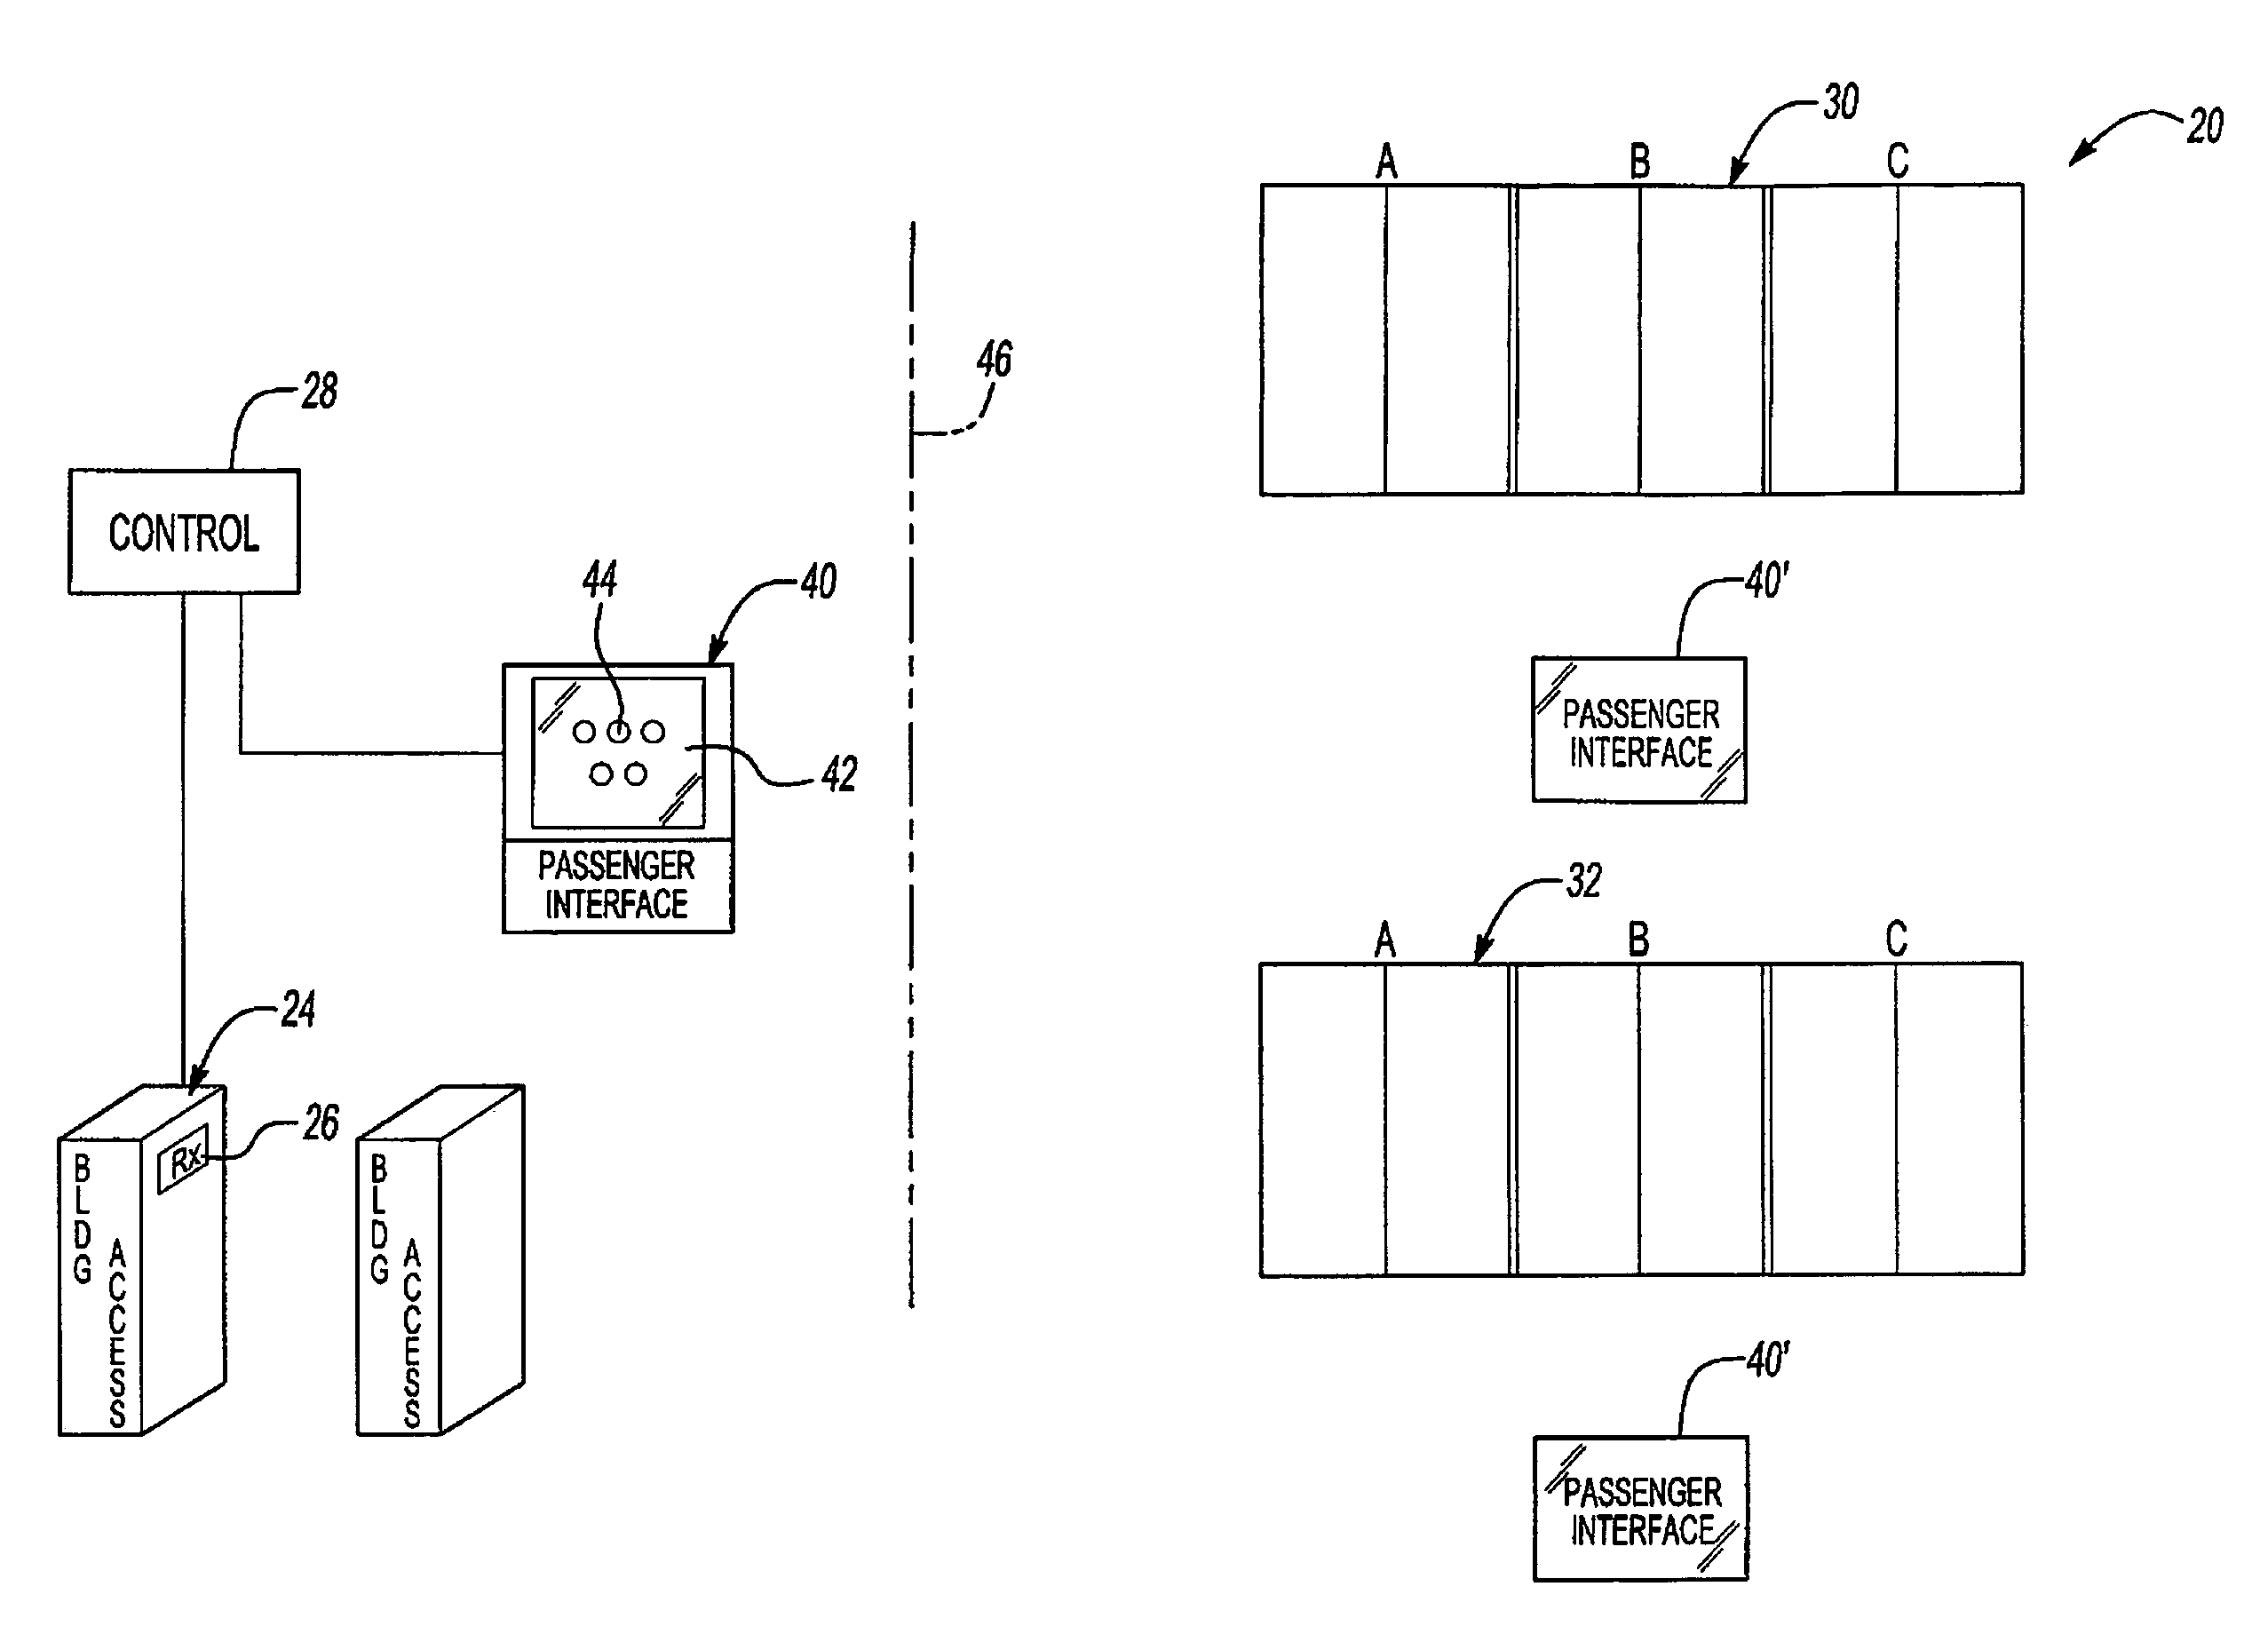 Automatic destination entry system with override capability